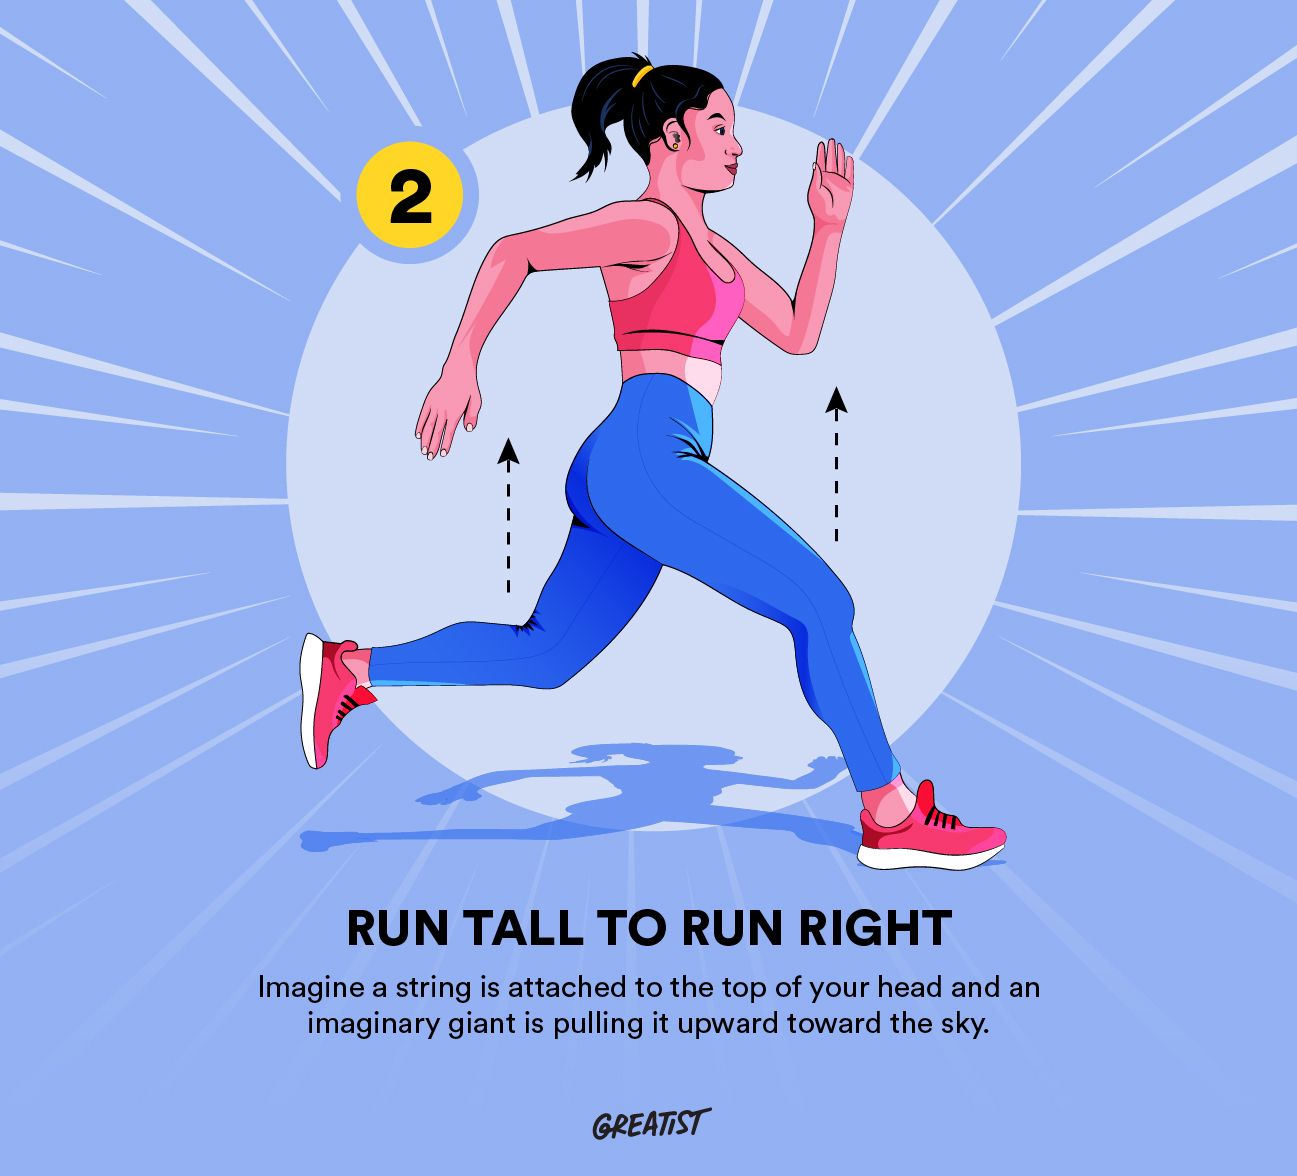 Cook , eat & move fast !: LOSE WEIGHT TO RUN FASTER (OR TO RUN FARTHER)